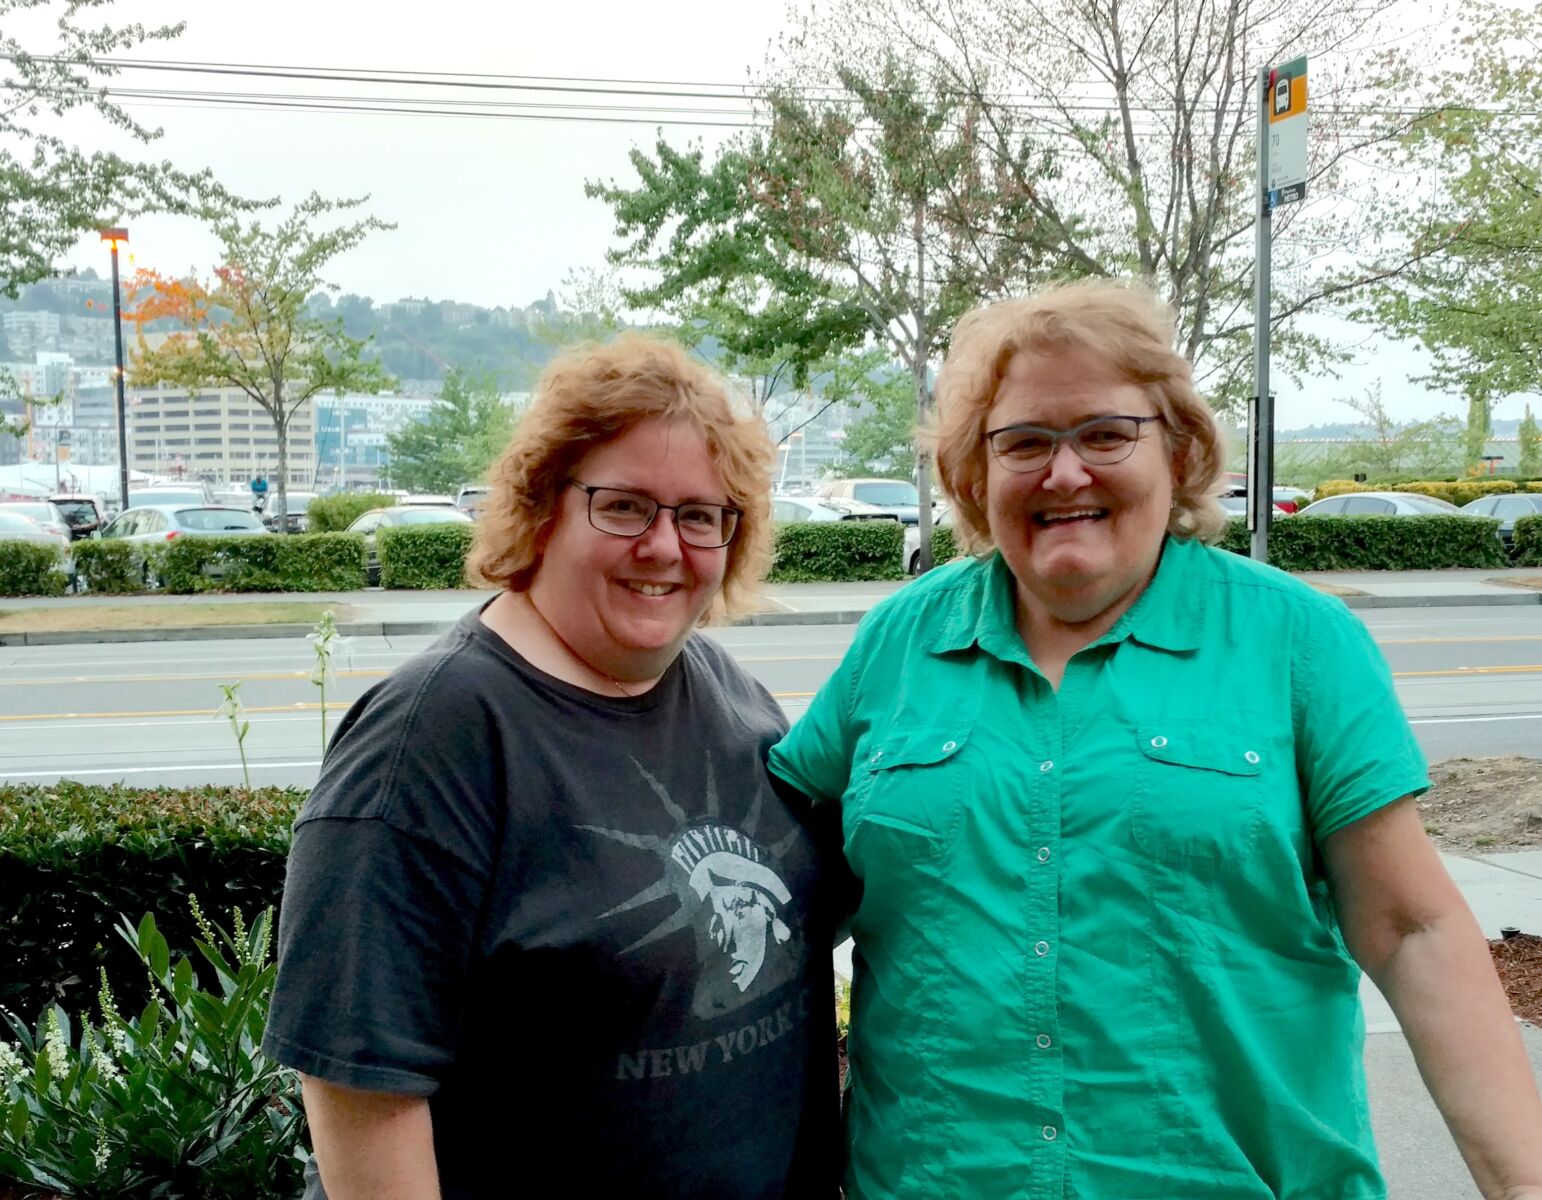 Two smiling women stand outdoors by a tree-lined street and parking lot, with one wearing a gray Statue of Liberty T-shirt and the other a green button-up shirt.